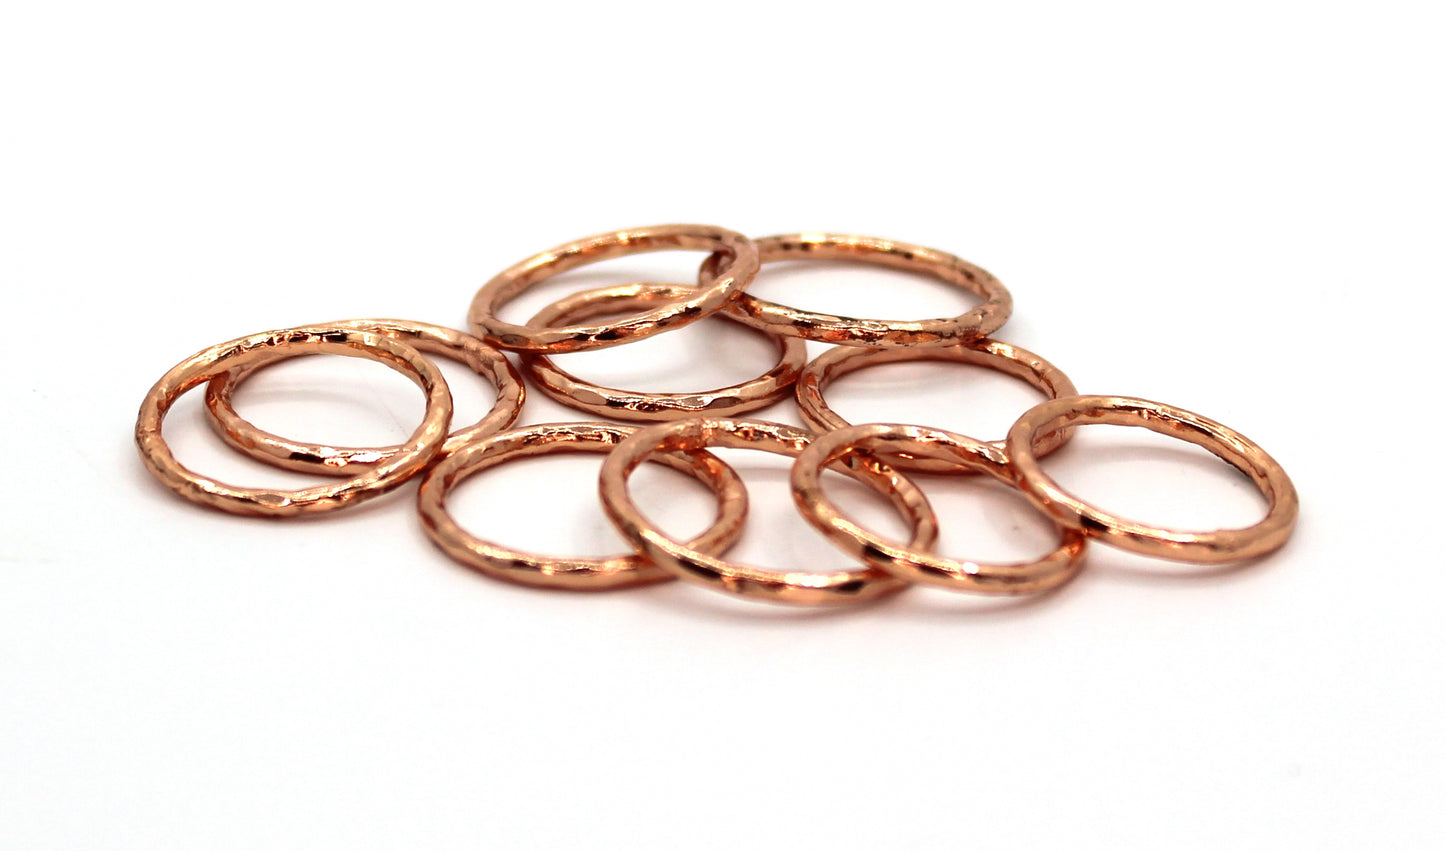 Copper stacking rings